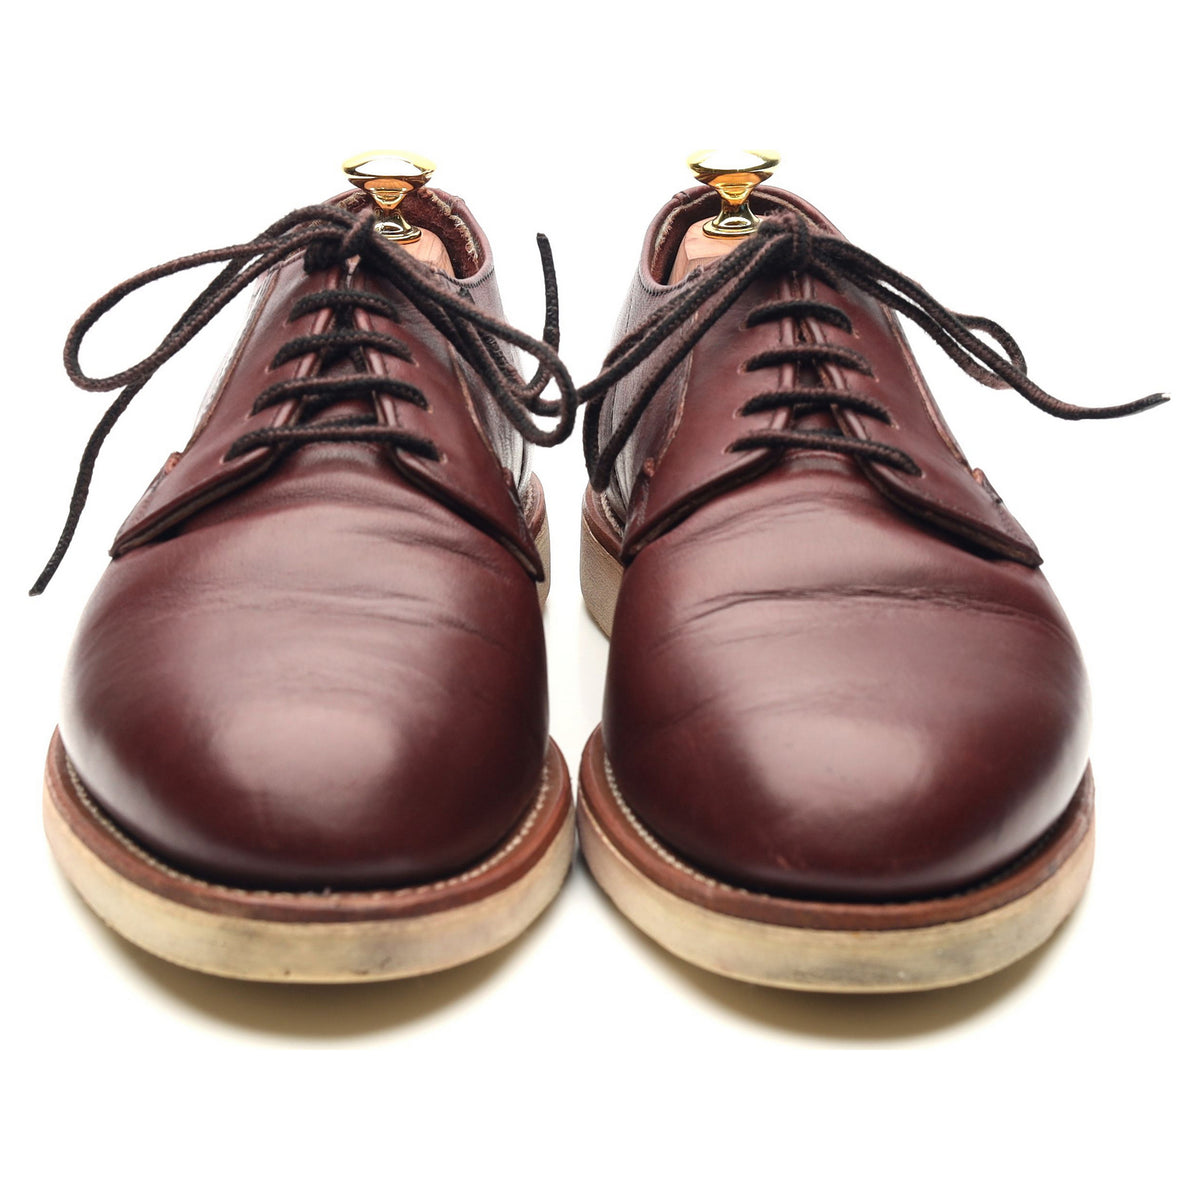 3117 Postman Oxford' Burgundy Leather Derby Shoes UK 8 US 9 - Abbot's Shoes